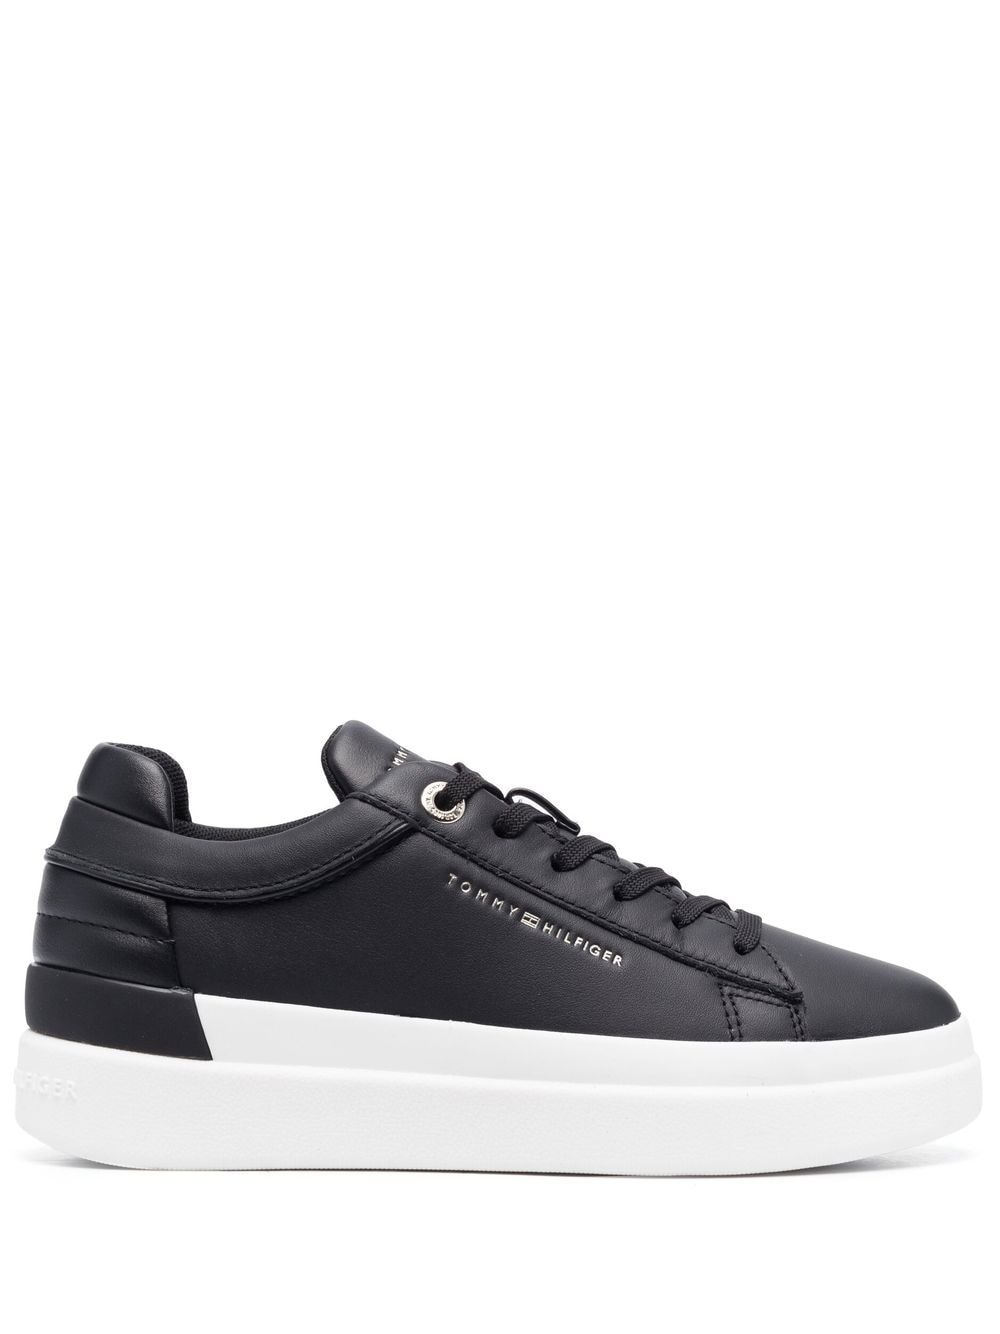 TOMMY HILFIGER LOGO-PRINT LACE-UP SNEAKERS